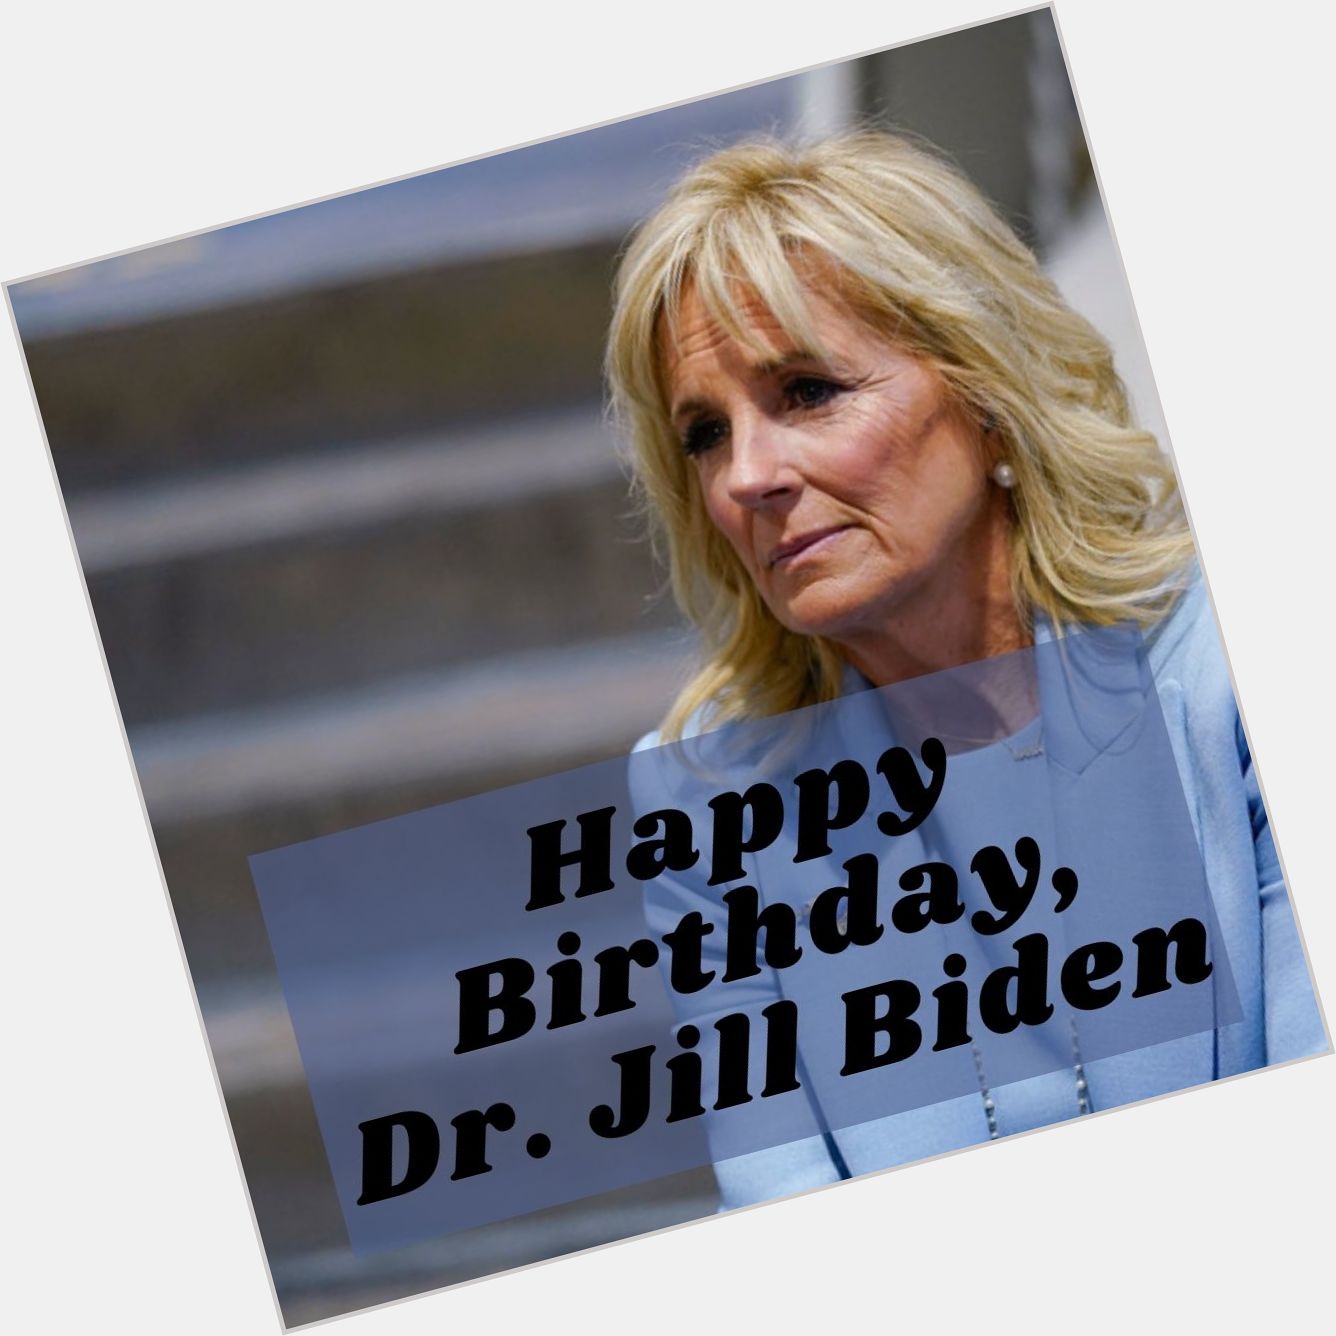 HAPPY BIRTHDAY to Dr. Jill Biden! : Join in wishing the first lady a happy 70th birthday!

 